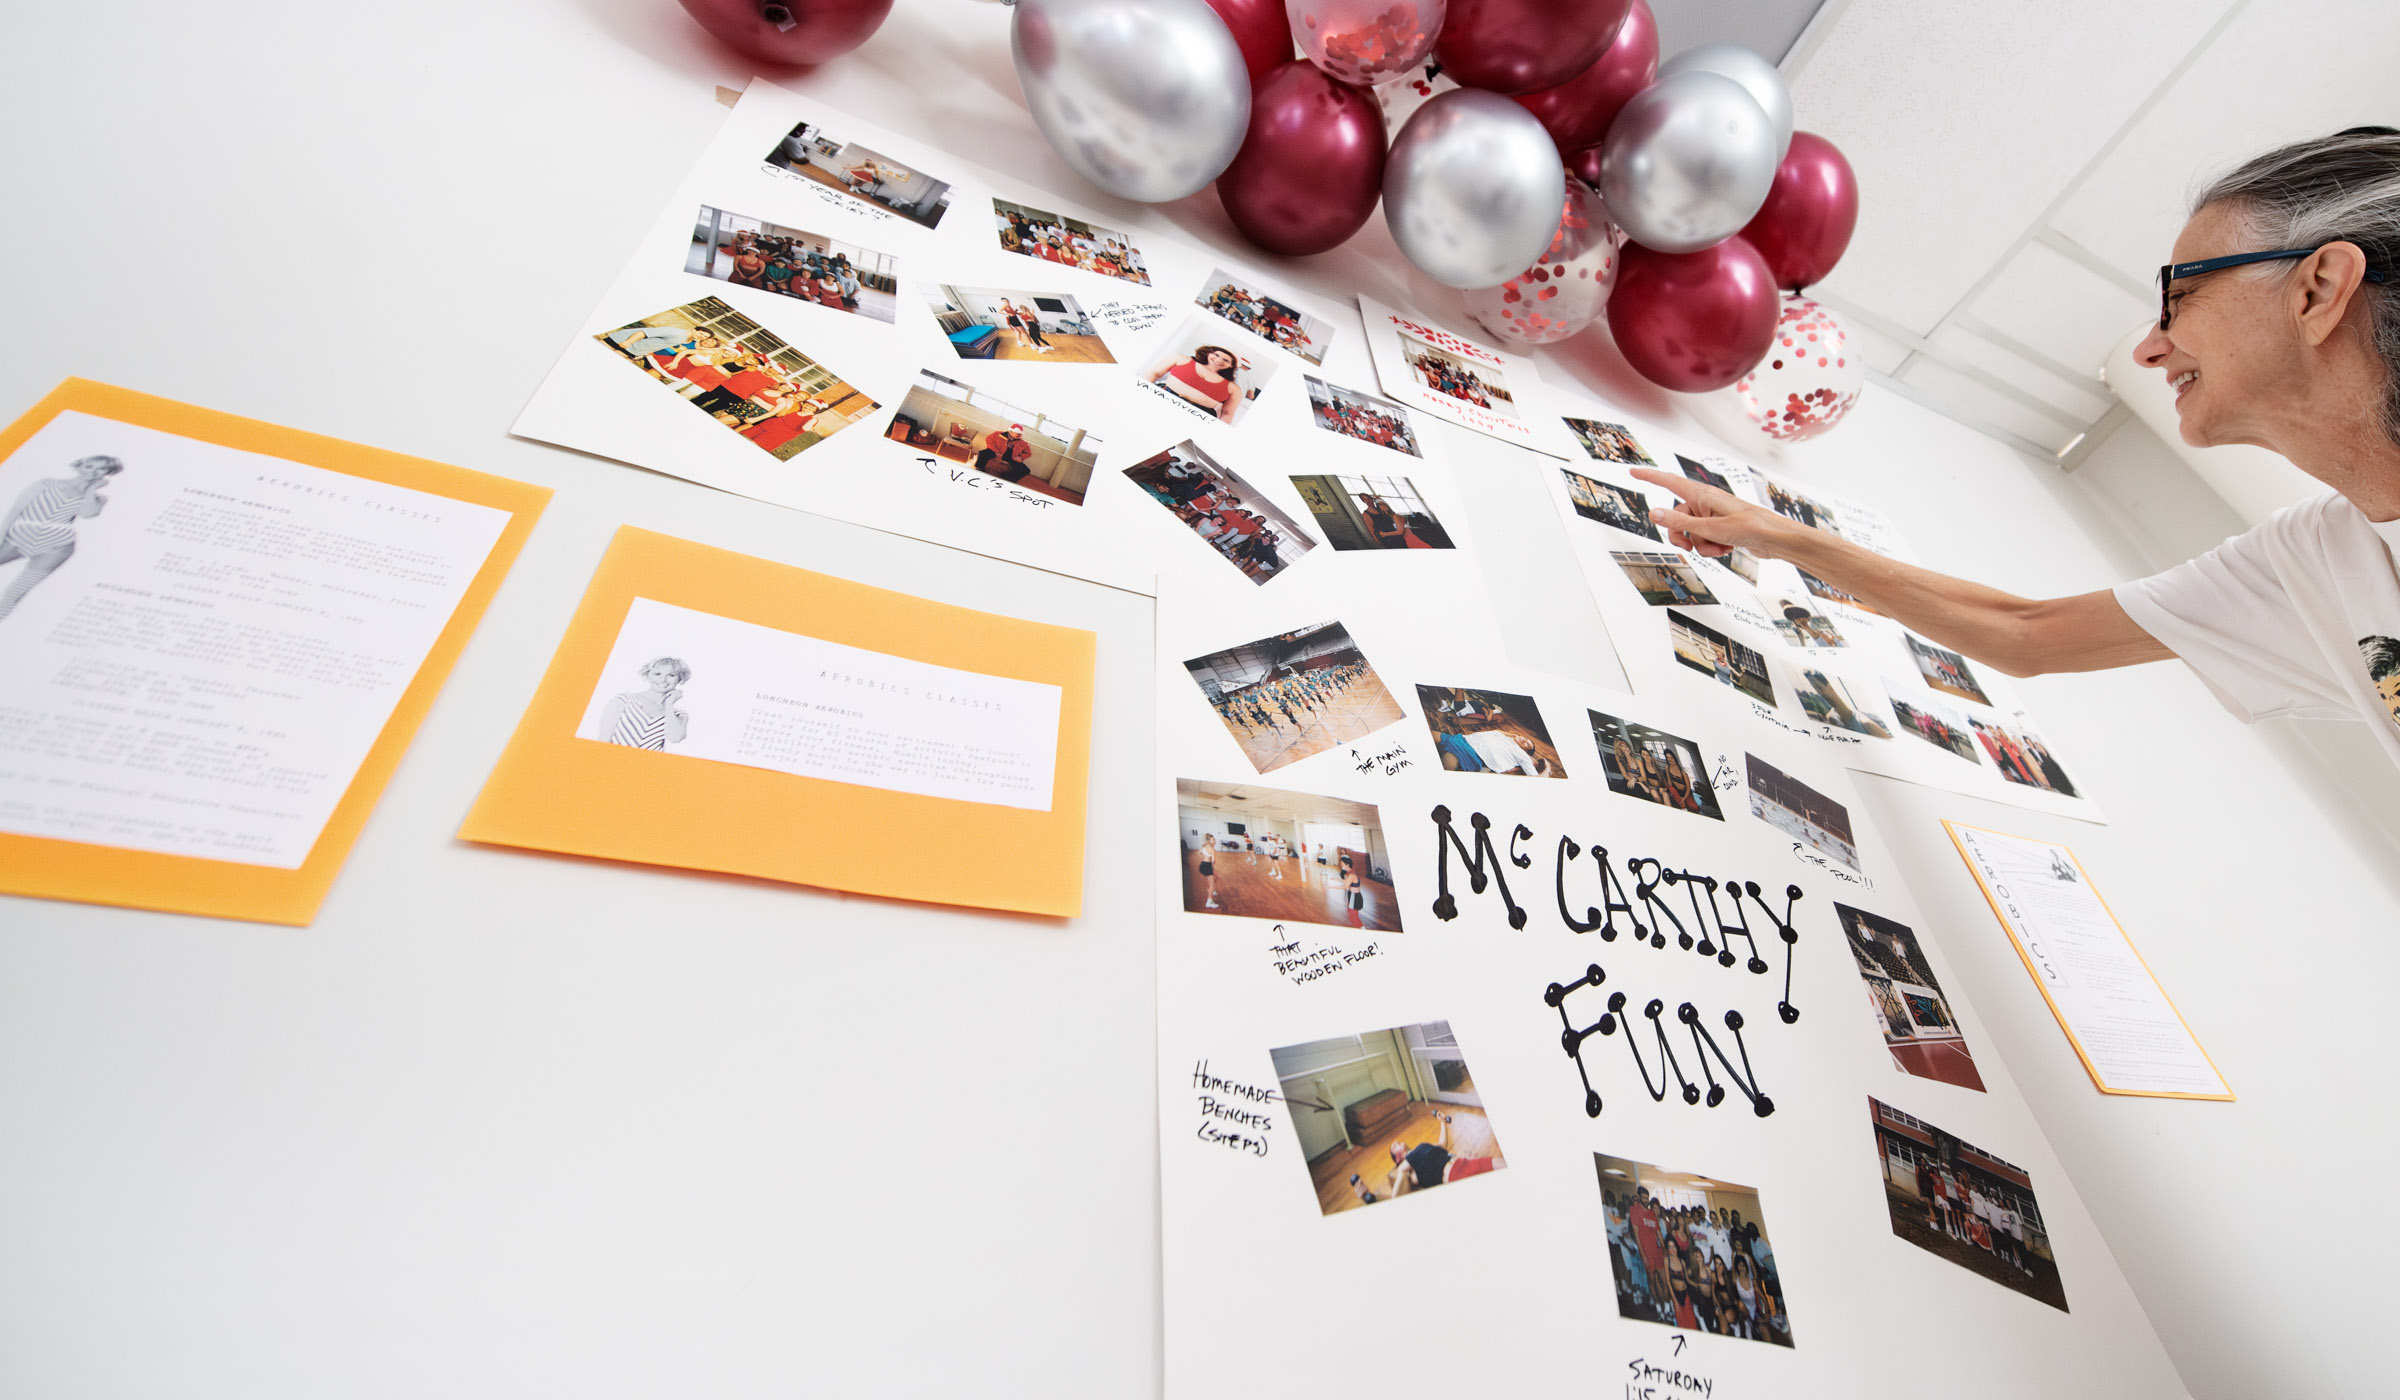 With &quot;McCarthy Fun&quot; in focus and balloons on top, a wall is covered with old photos and flyers from aerobics classes held in the McCarthy Gym studio in the 1980s and 1990s.